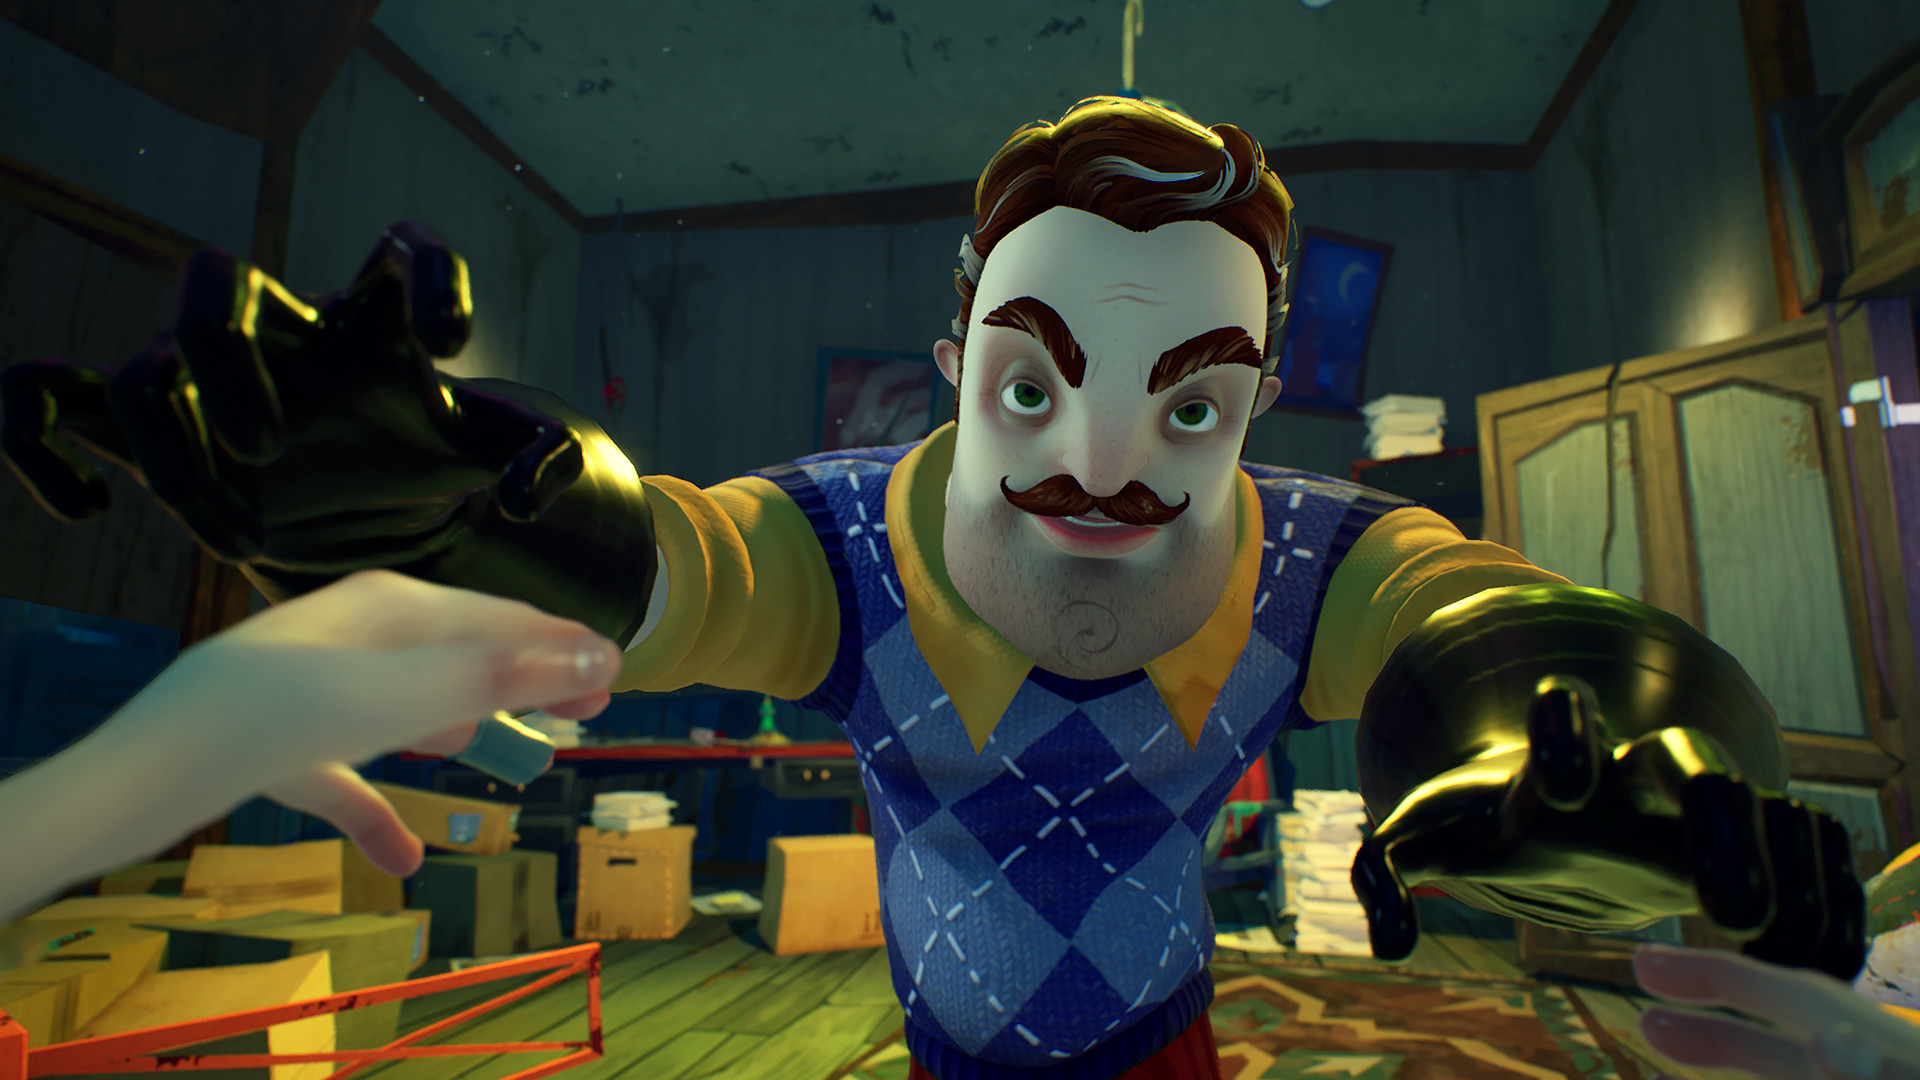 download free hello neighbor two